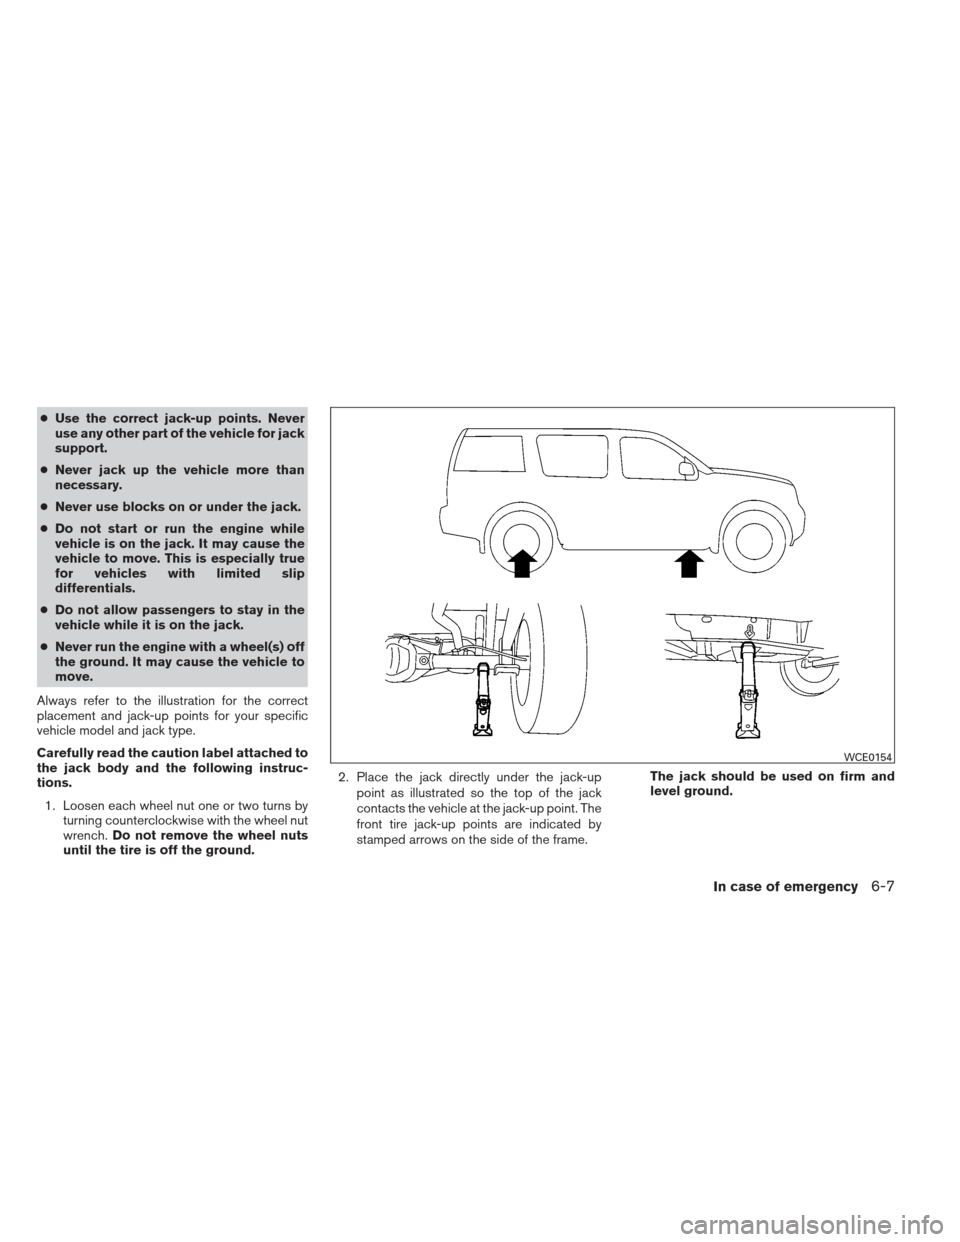 NISSAN XTERRA 2013 N50 / 2.G Owners Manual ●Use the correct jack-up points. Never
use any other part of the vehicle for jack
support.
● Never jack up the vehicle more than
necessary.
● Never use blocks on or under the jack.
● Do not st